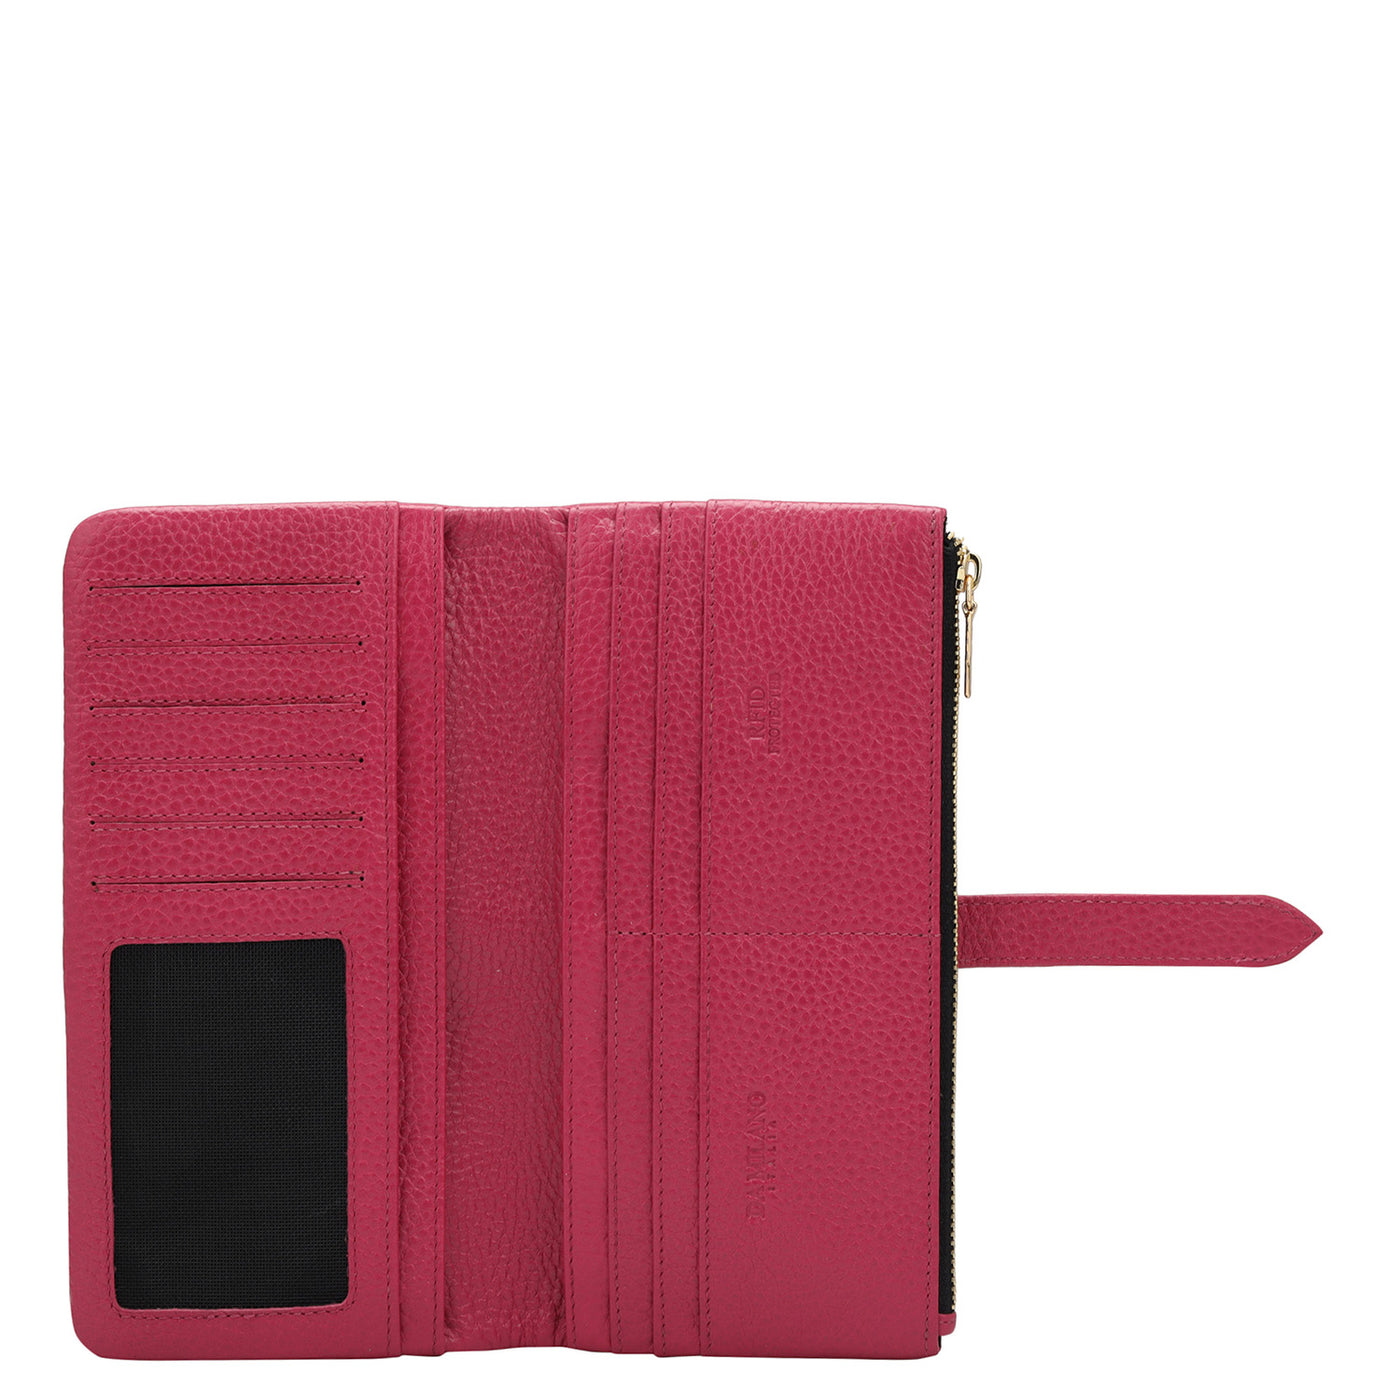 Wax Leather Ladies Wallet - Hot Pink